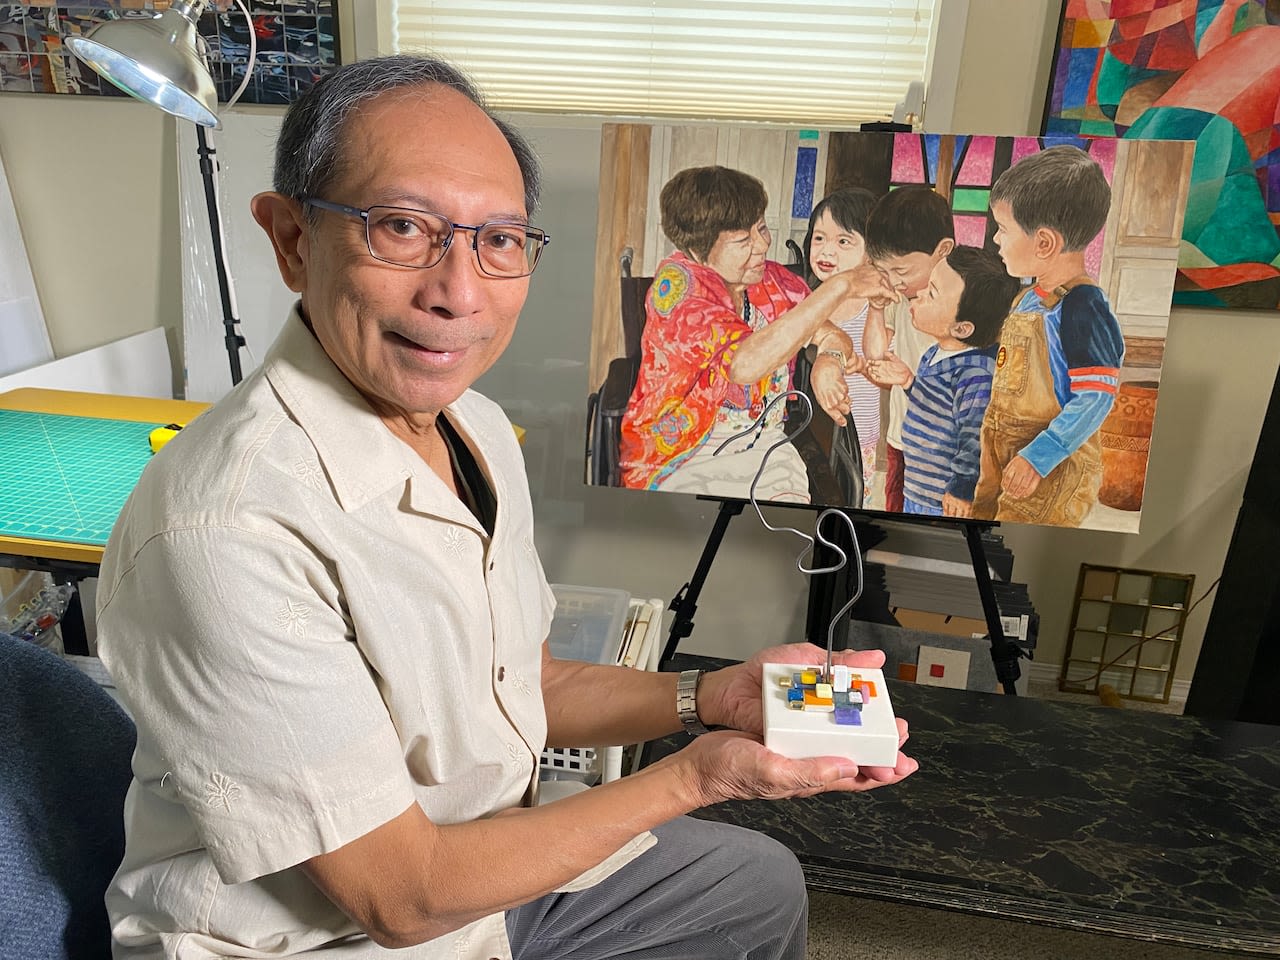 Sealed with a kiss: Filipino artist showcases respect for elders, culture